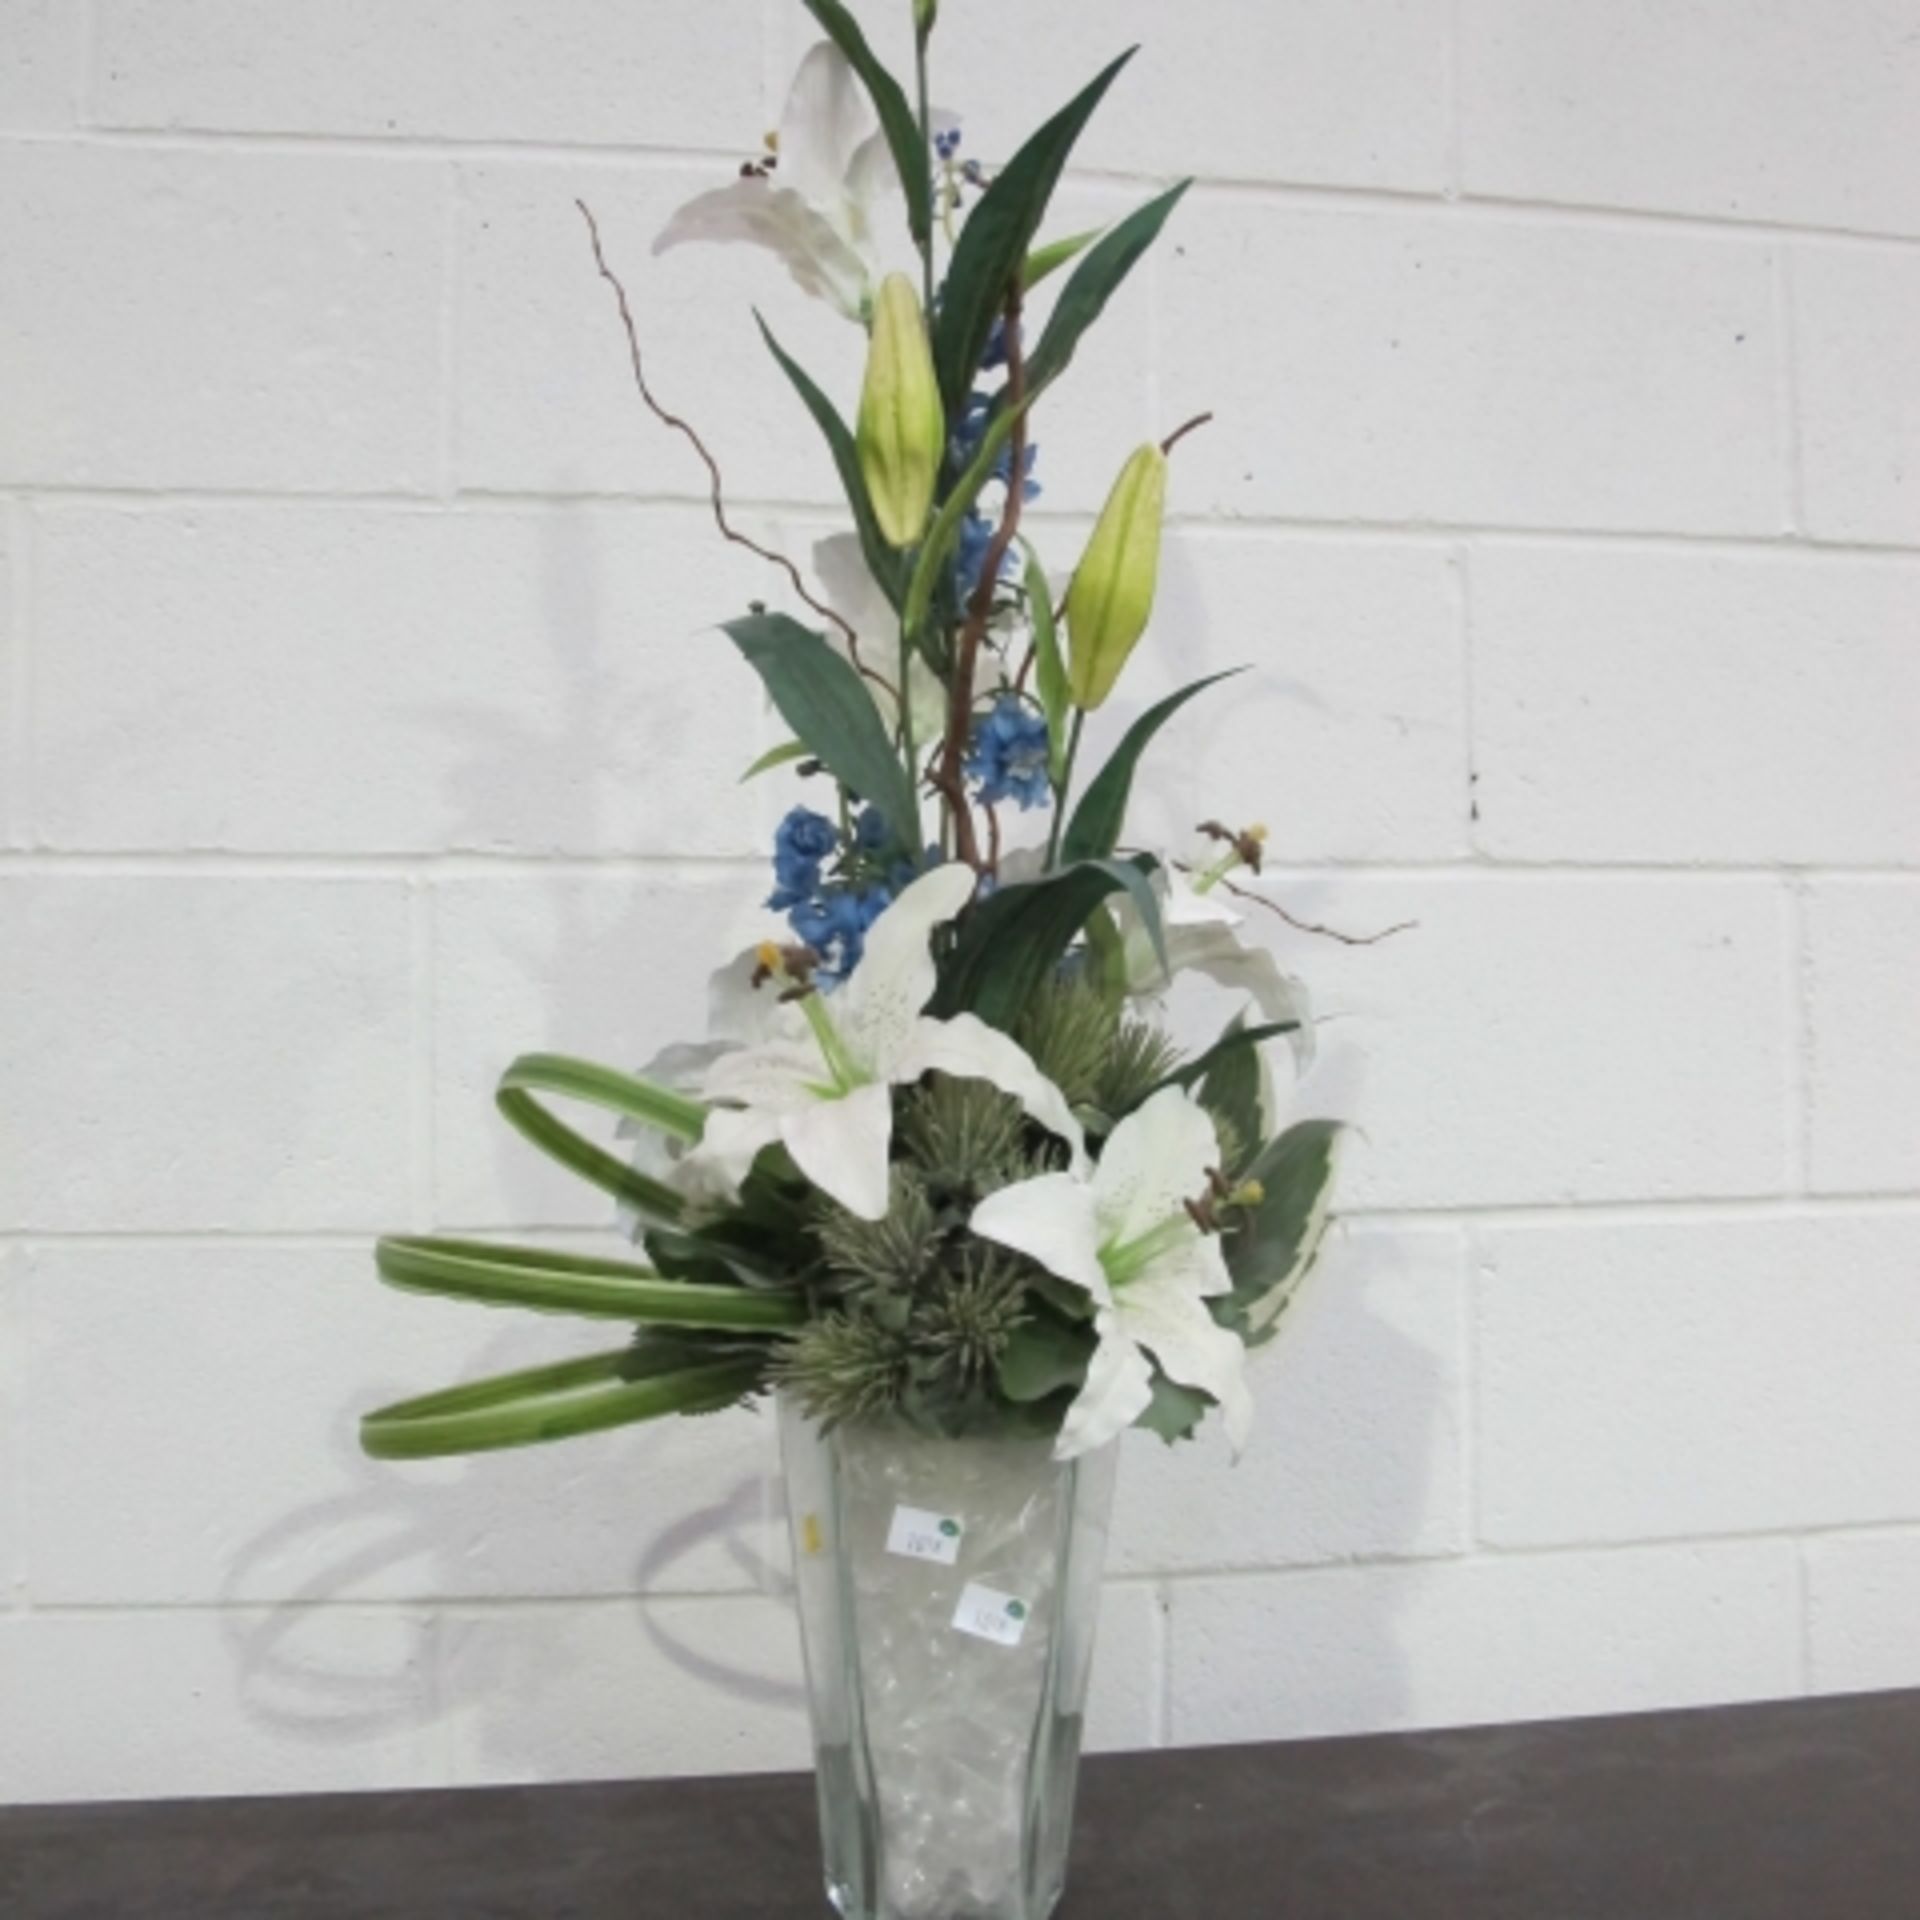 Four artificial Flower displays of various forms and designs (one features  3 new pillar candles) - Image 2 of 4